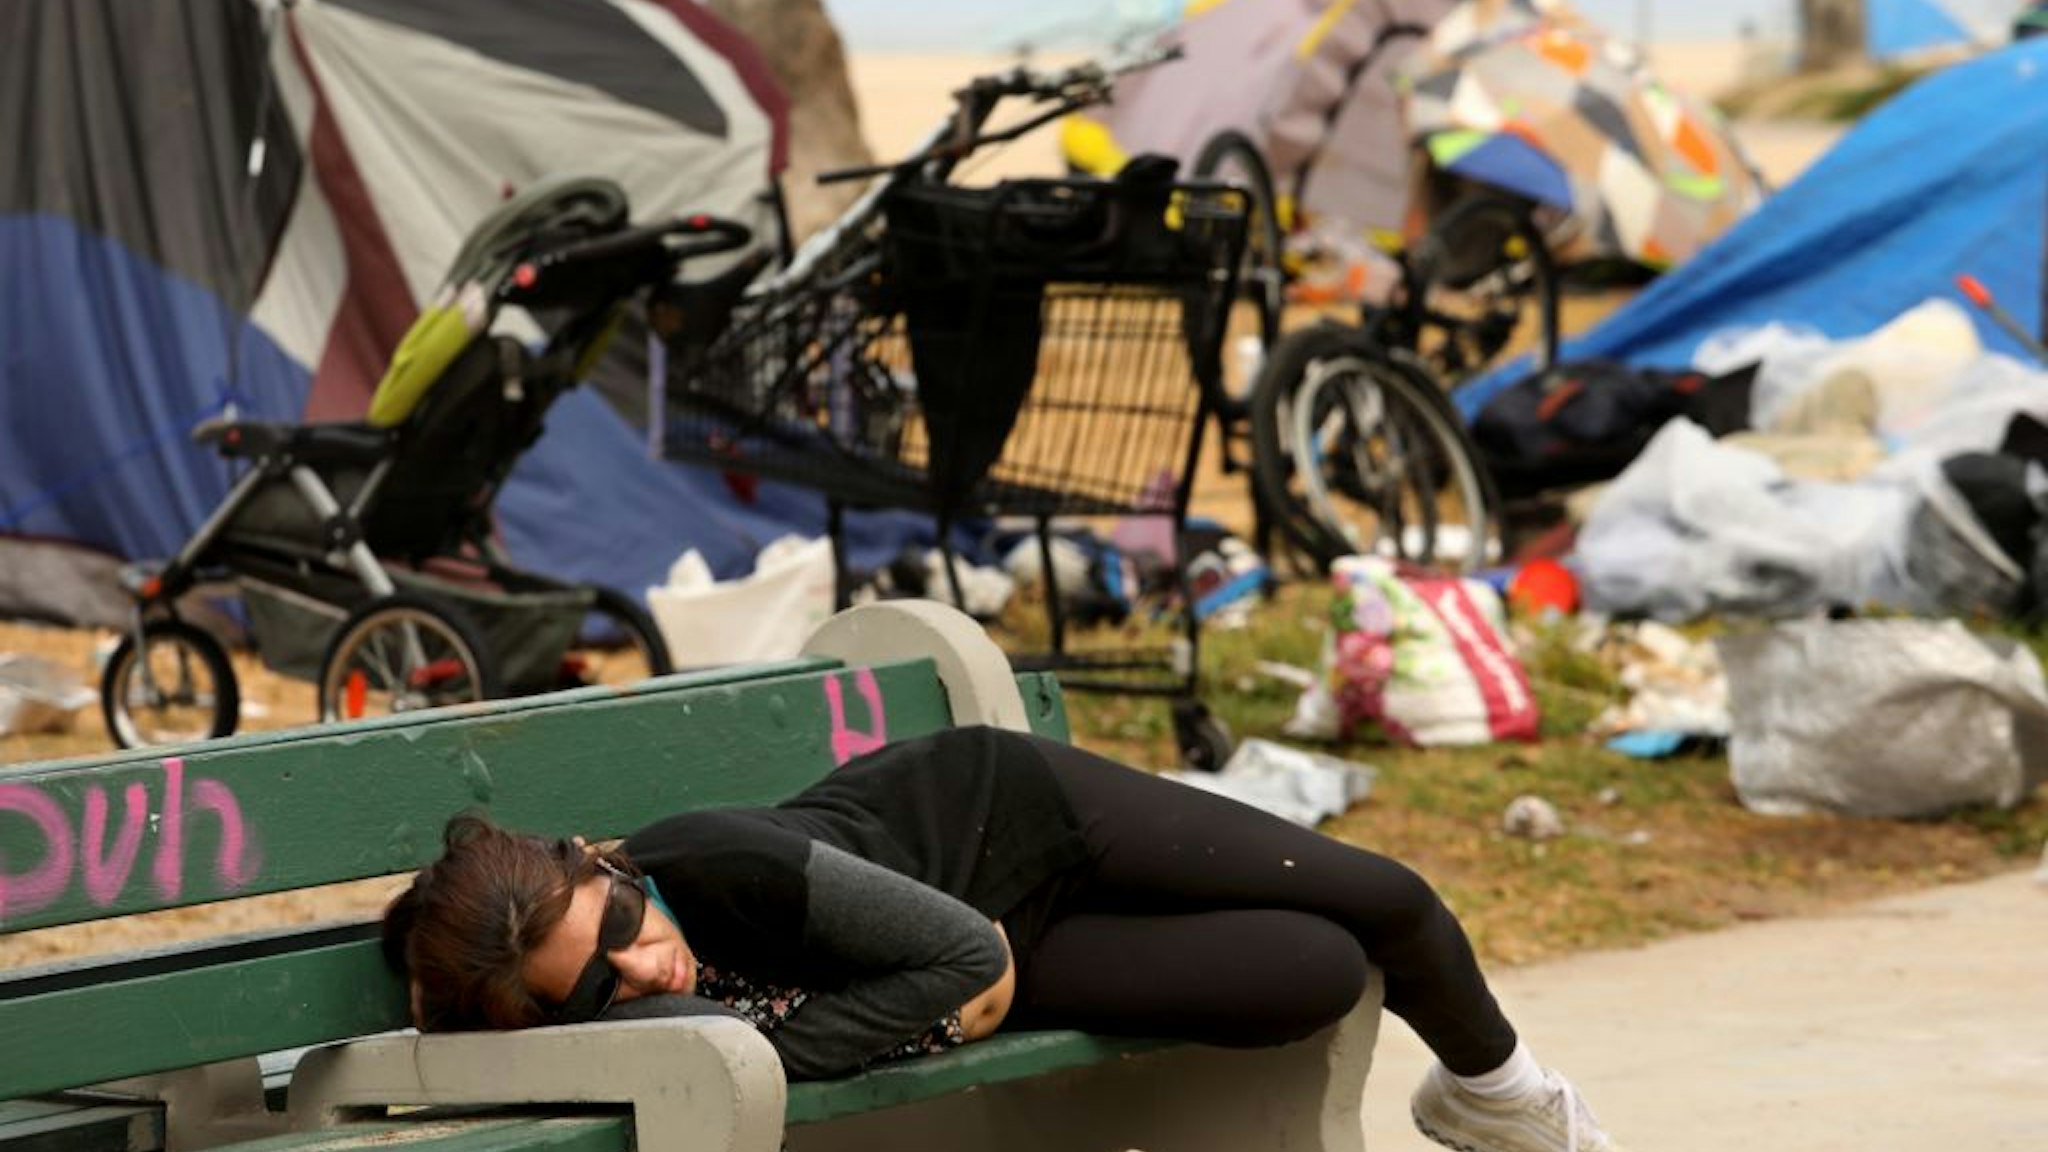 VENICE, CA - MAY 18, 2021 - - A woman sleeps on a bench against a backdrop of homeless encampments along Ocean Front Walk in Venice May 18, 2021.